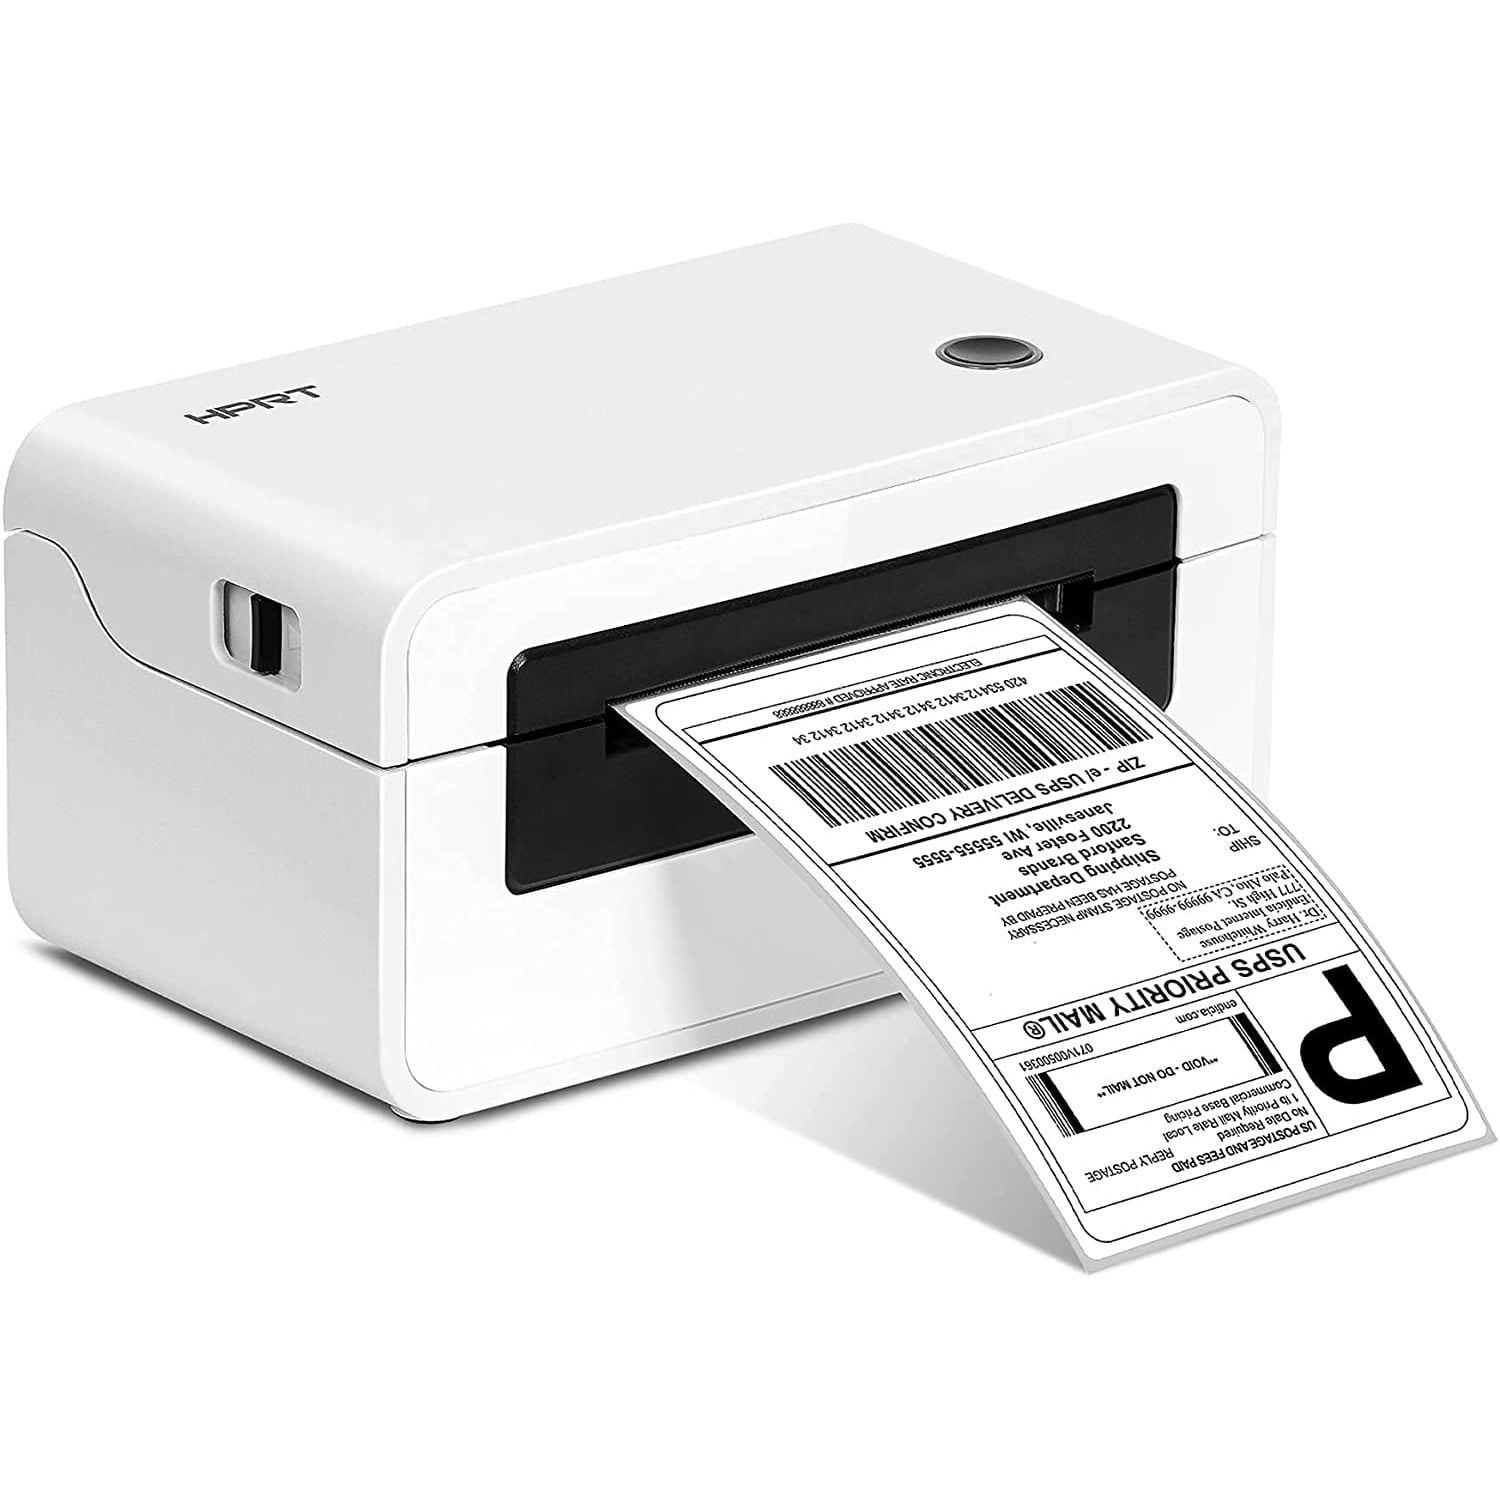 HPRT Label Printer High Speed Thermal Labels Printer Shipping Packages(White) - Walmart.com